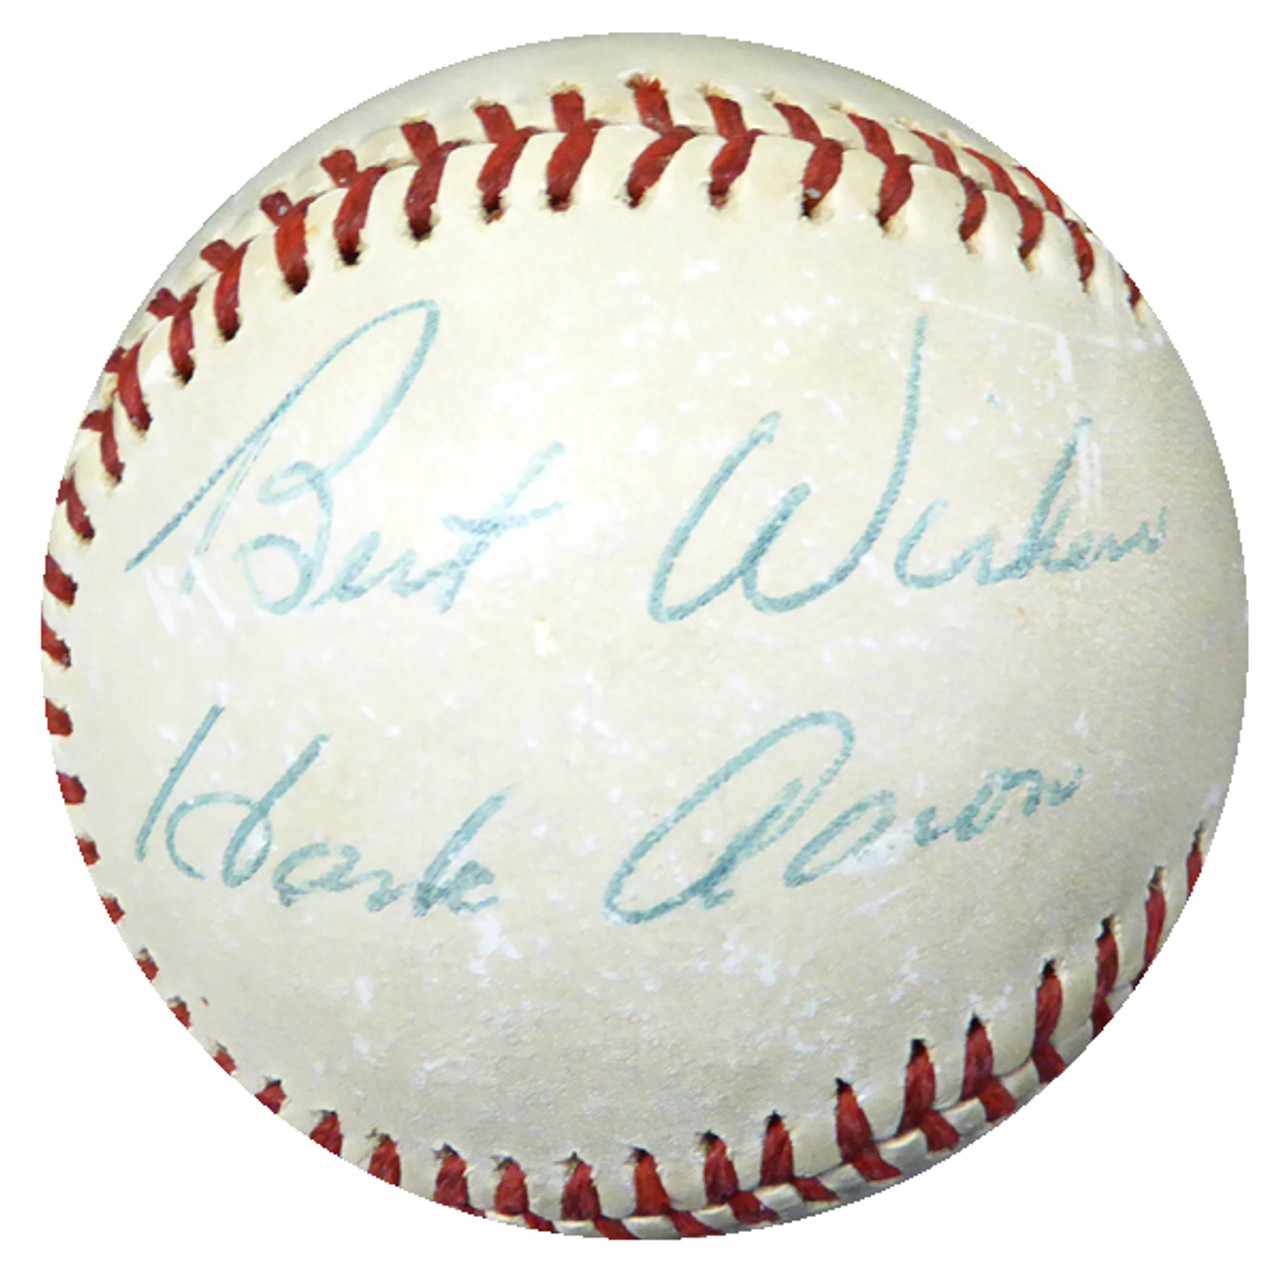 Hank Aaron Autographed Official AL Baseball Atlanta Braves Best Wishes  Vintage Playing Days Signature PSA/DNA #W05582 - Mill Creek Sports